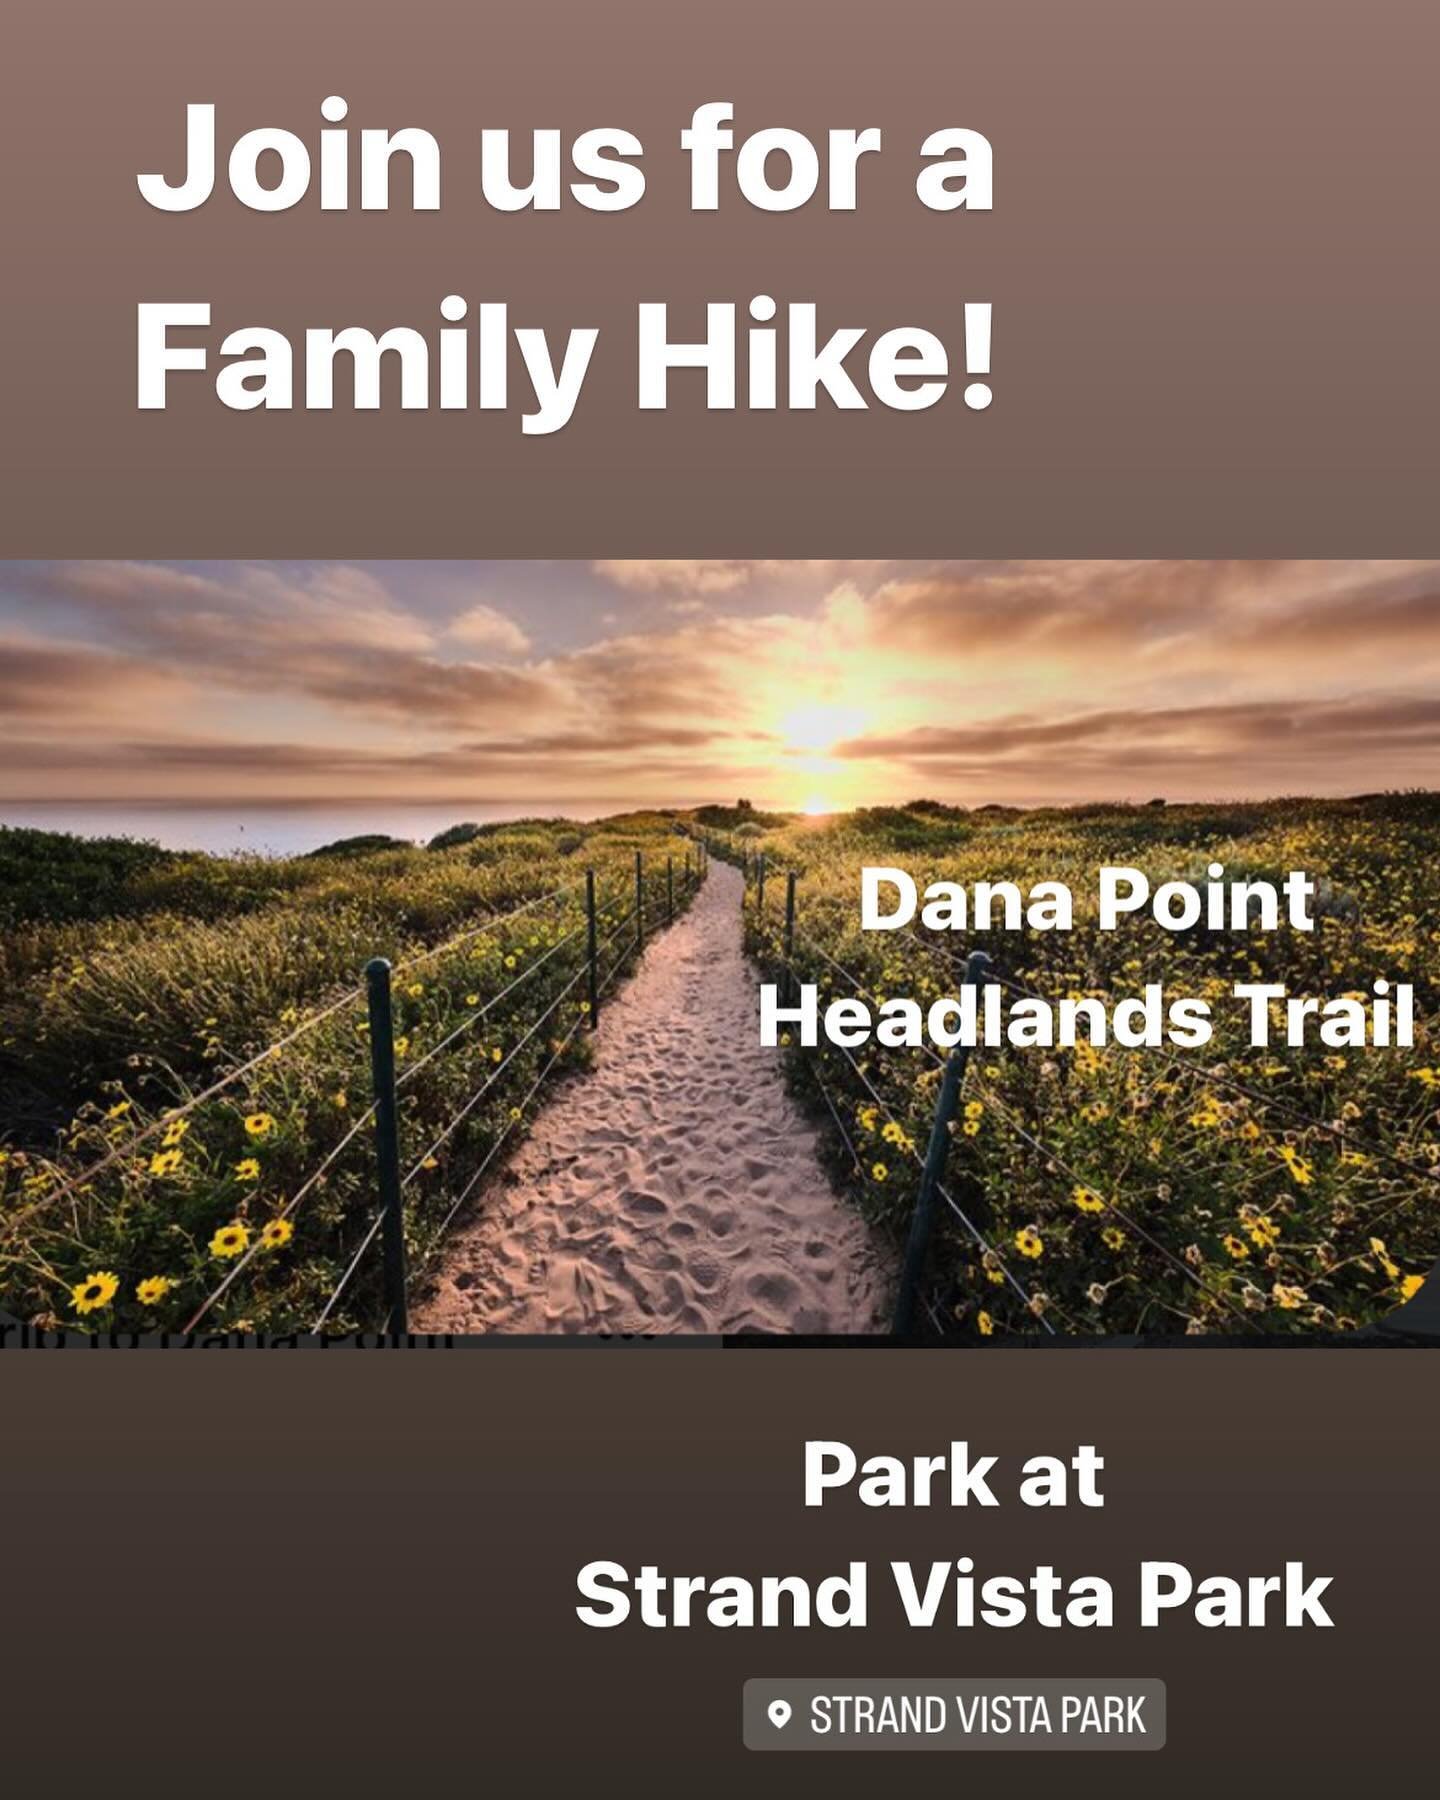 Tomorrow at 9 AM! Family Hike through the Dana Point Headlands Trail. Park at Strand Vista Park. 

#theconnectionoc #loveserveconnect